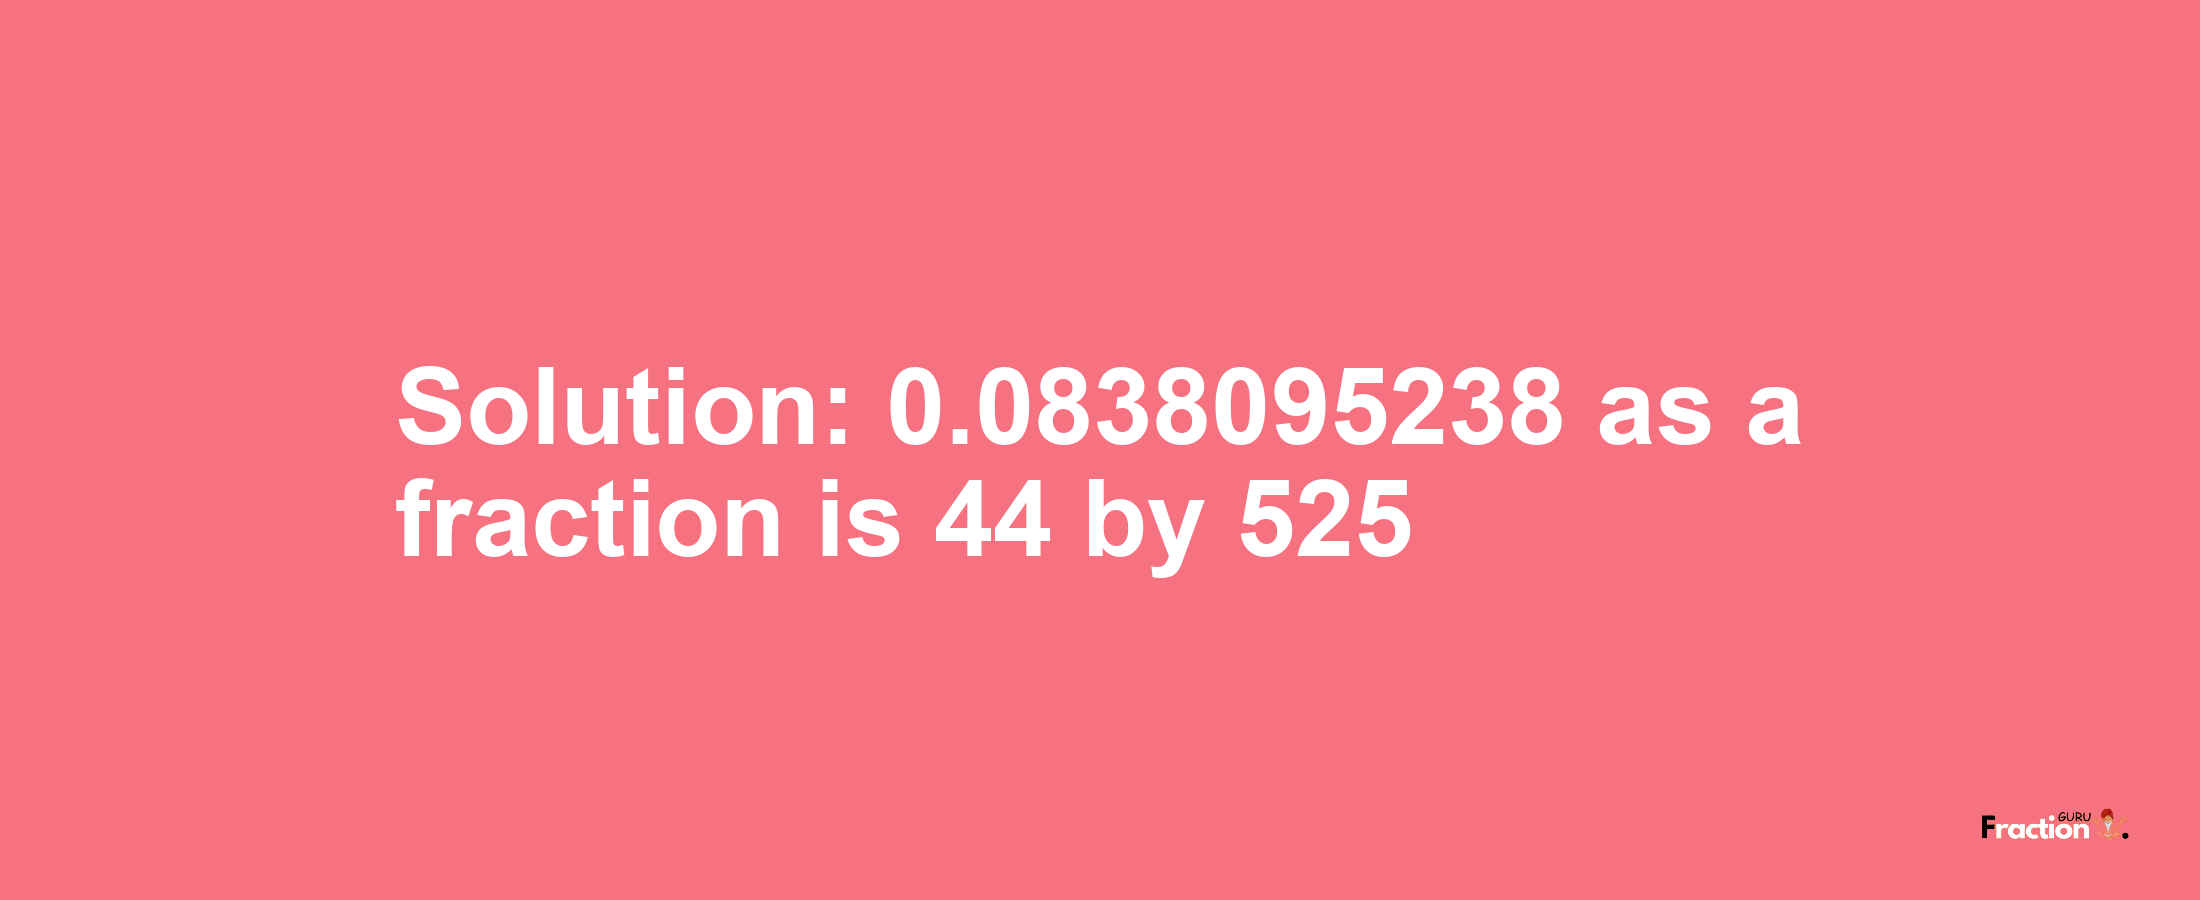 Solution:0.0838095238 as a fraction is 44/525